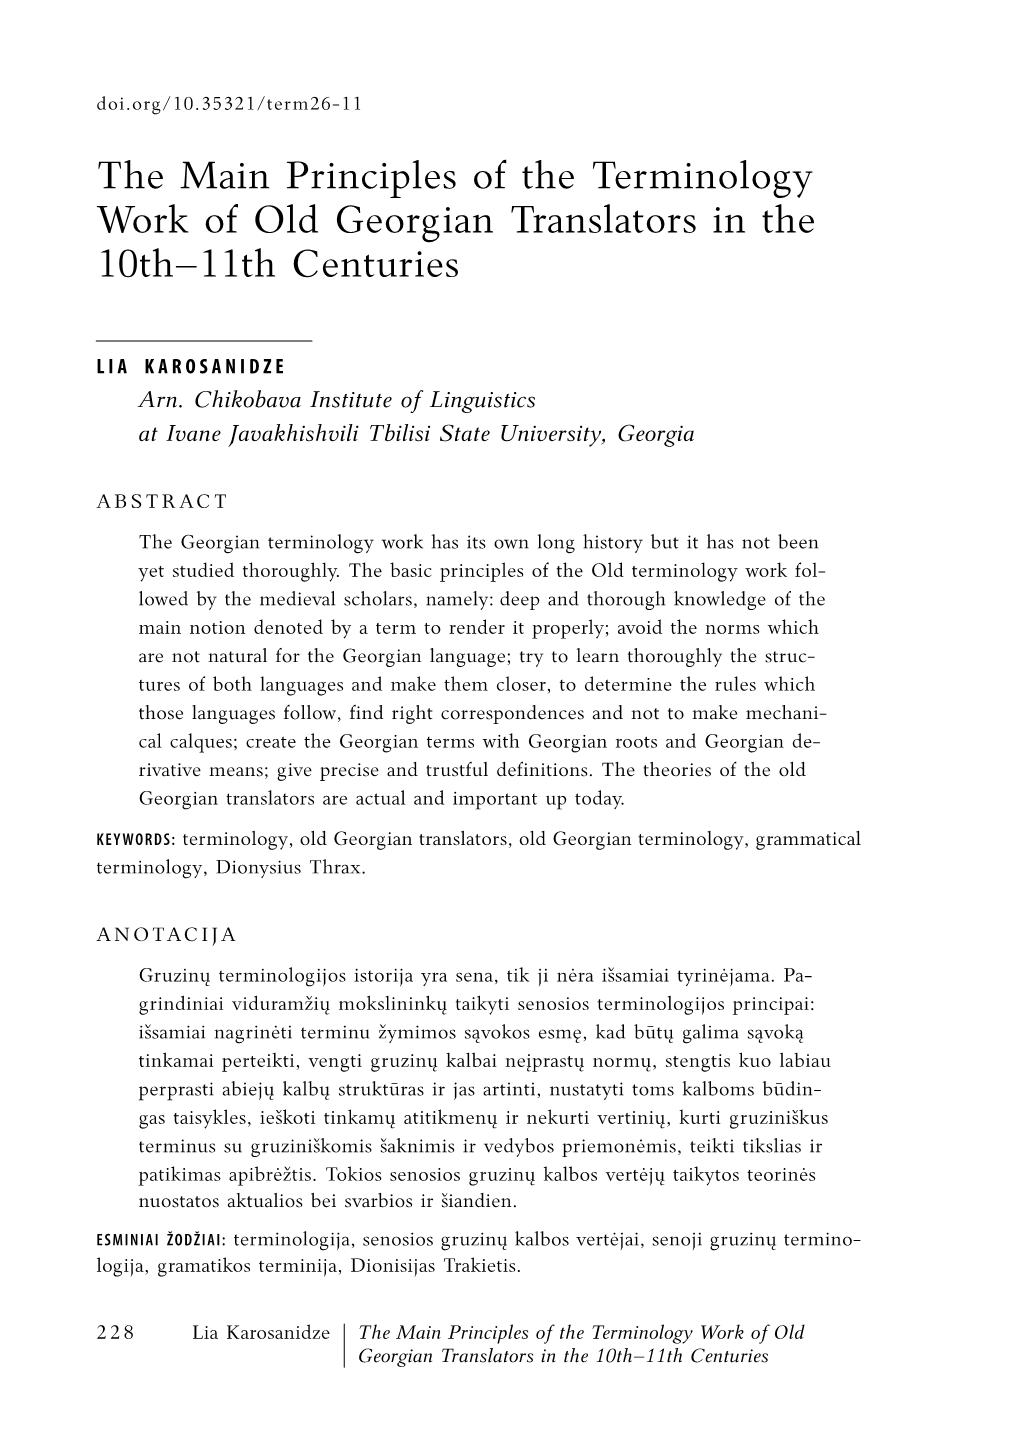 The Main Principles of the Terminology Work of Old Georgian Translators in the 10Th–11Th Centuries